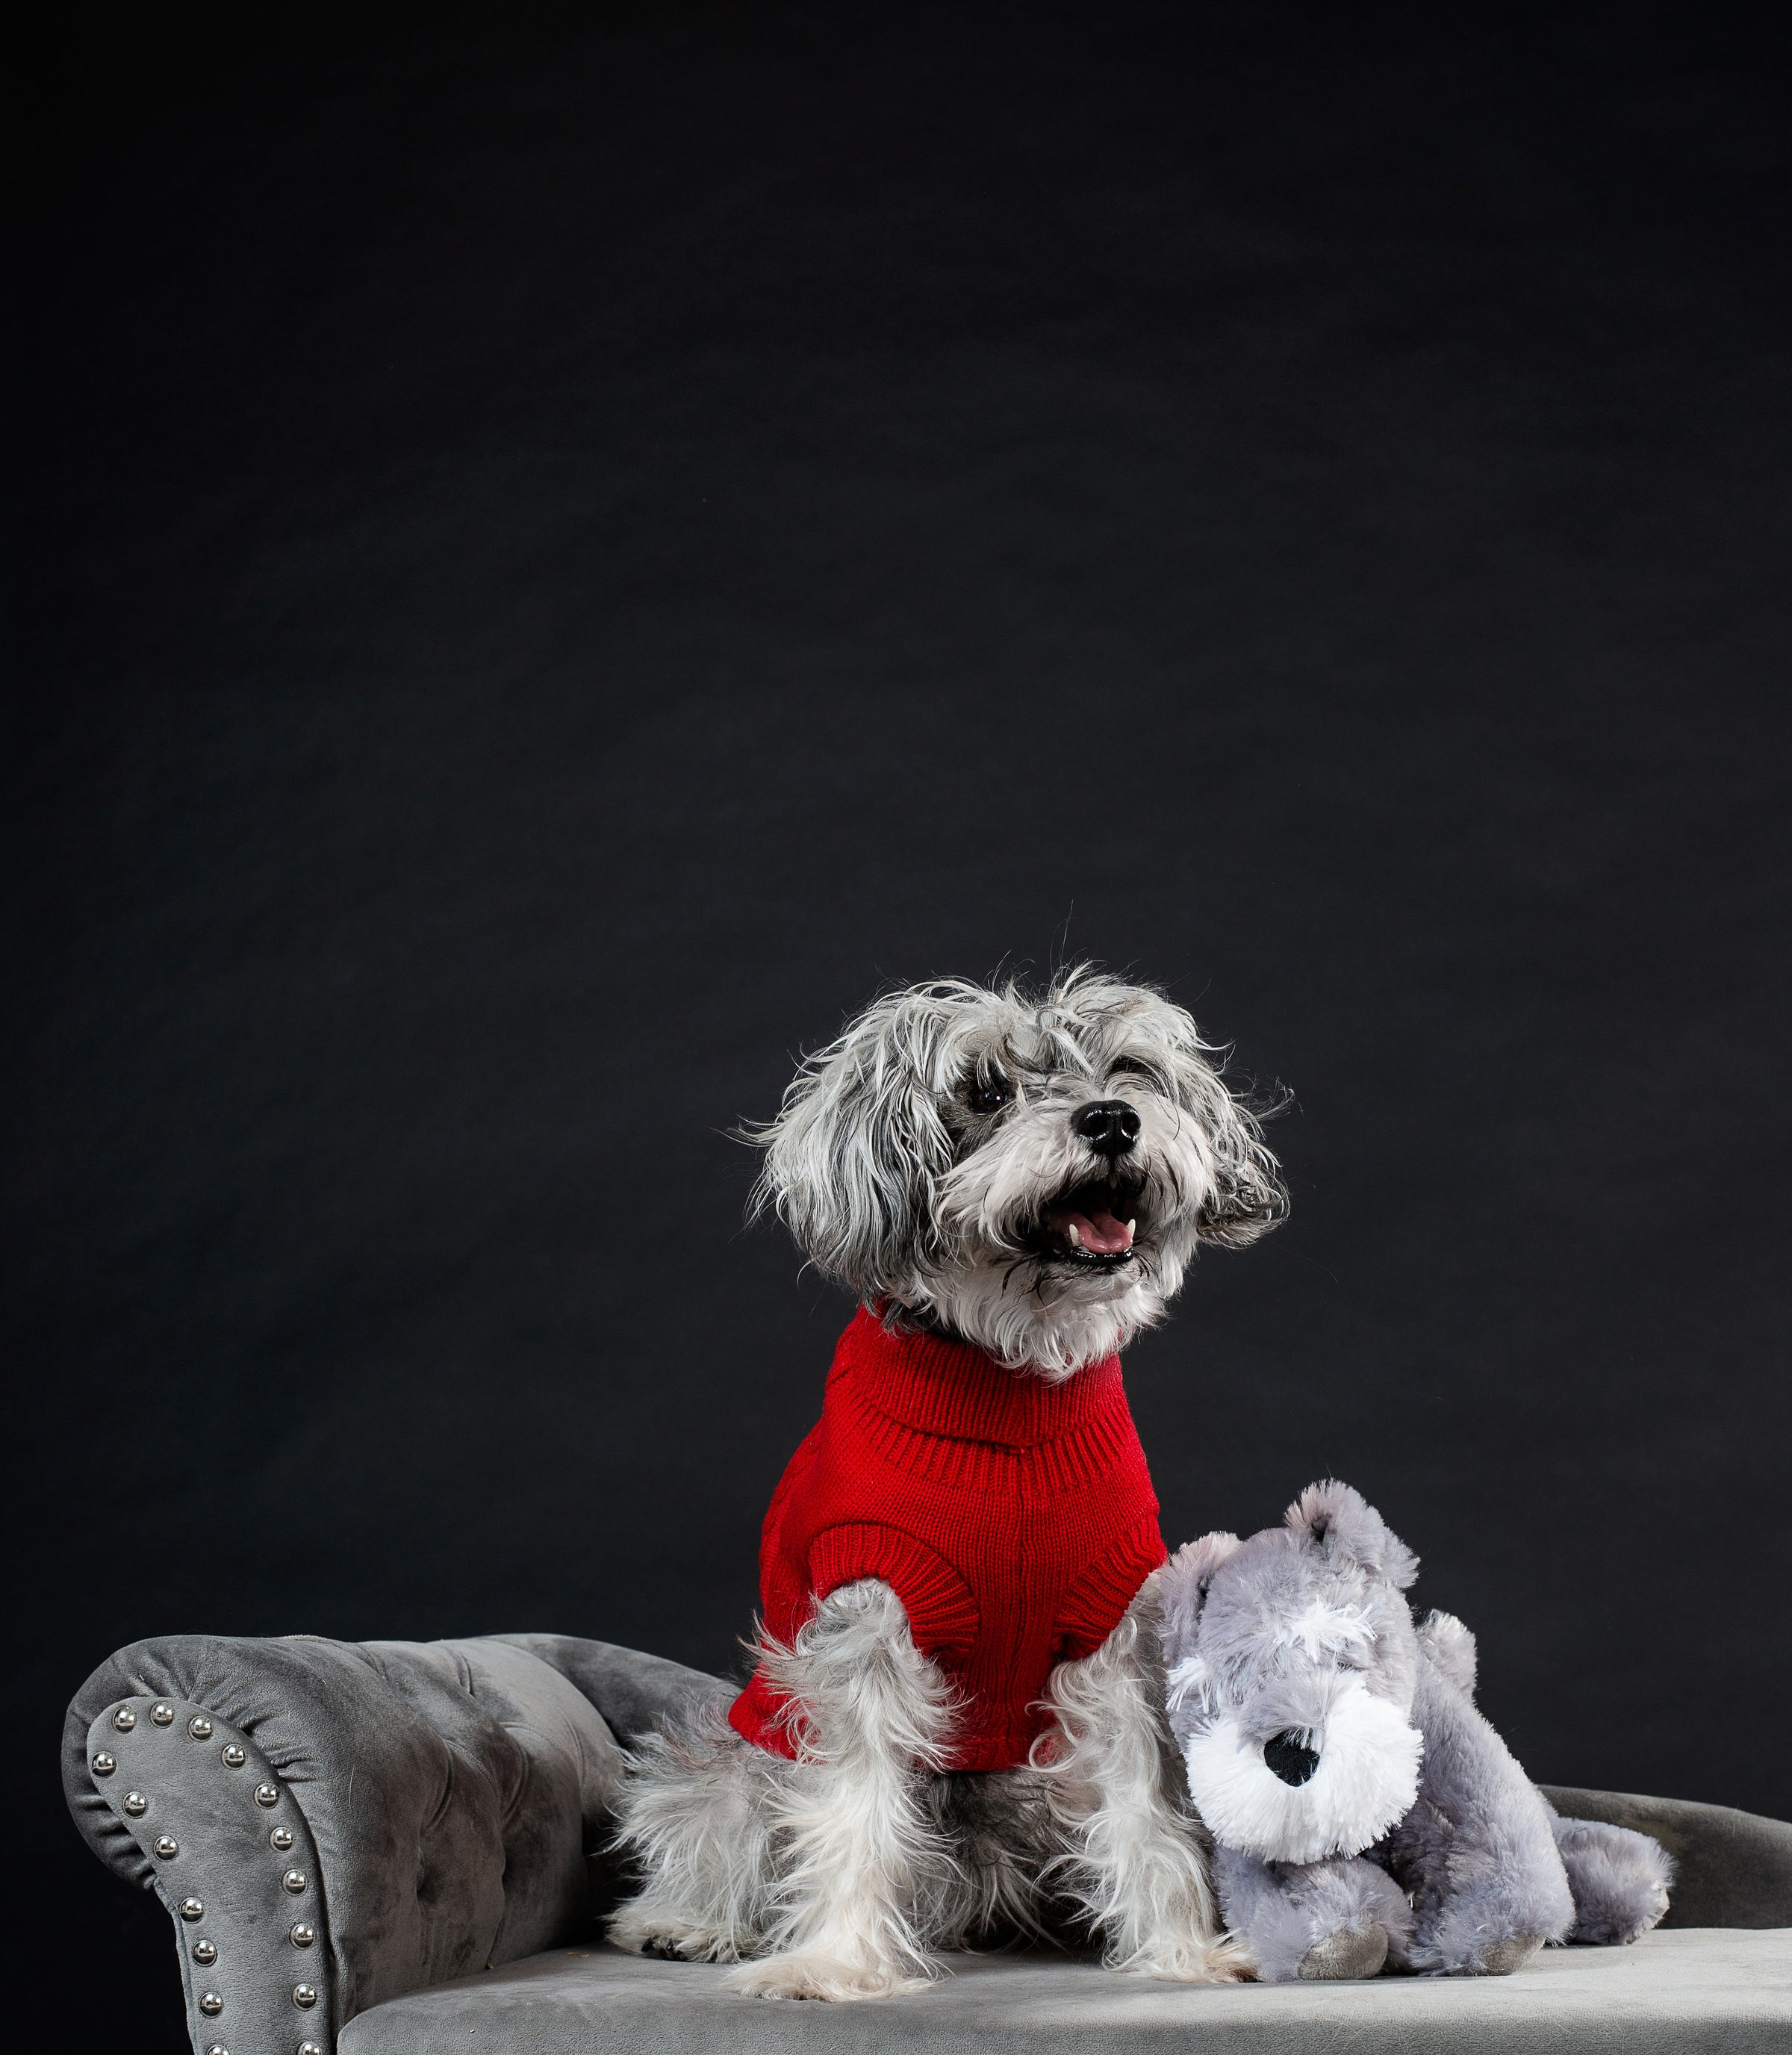 a dog seating on a chair with a red sweater next to a stuffed dog